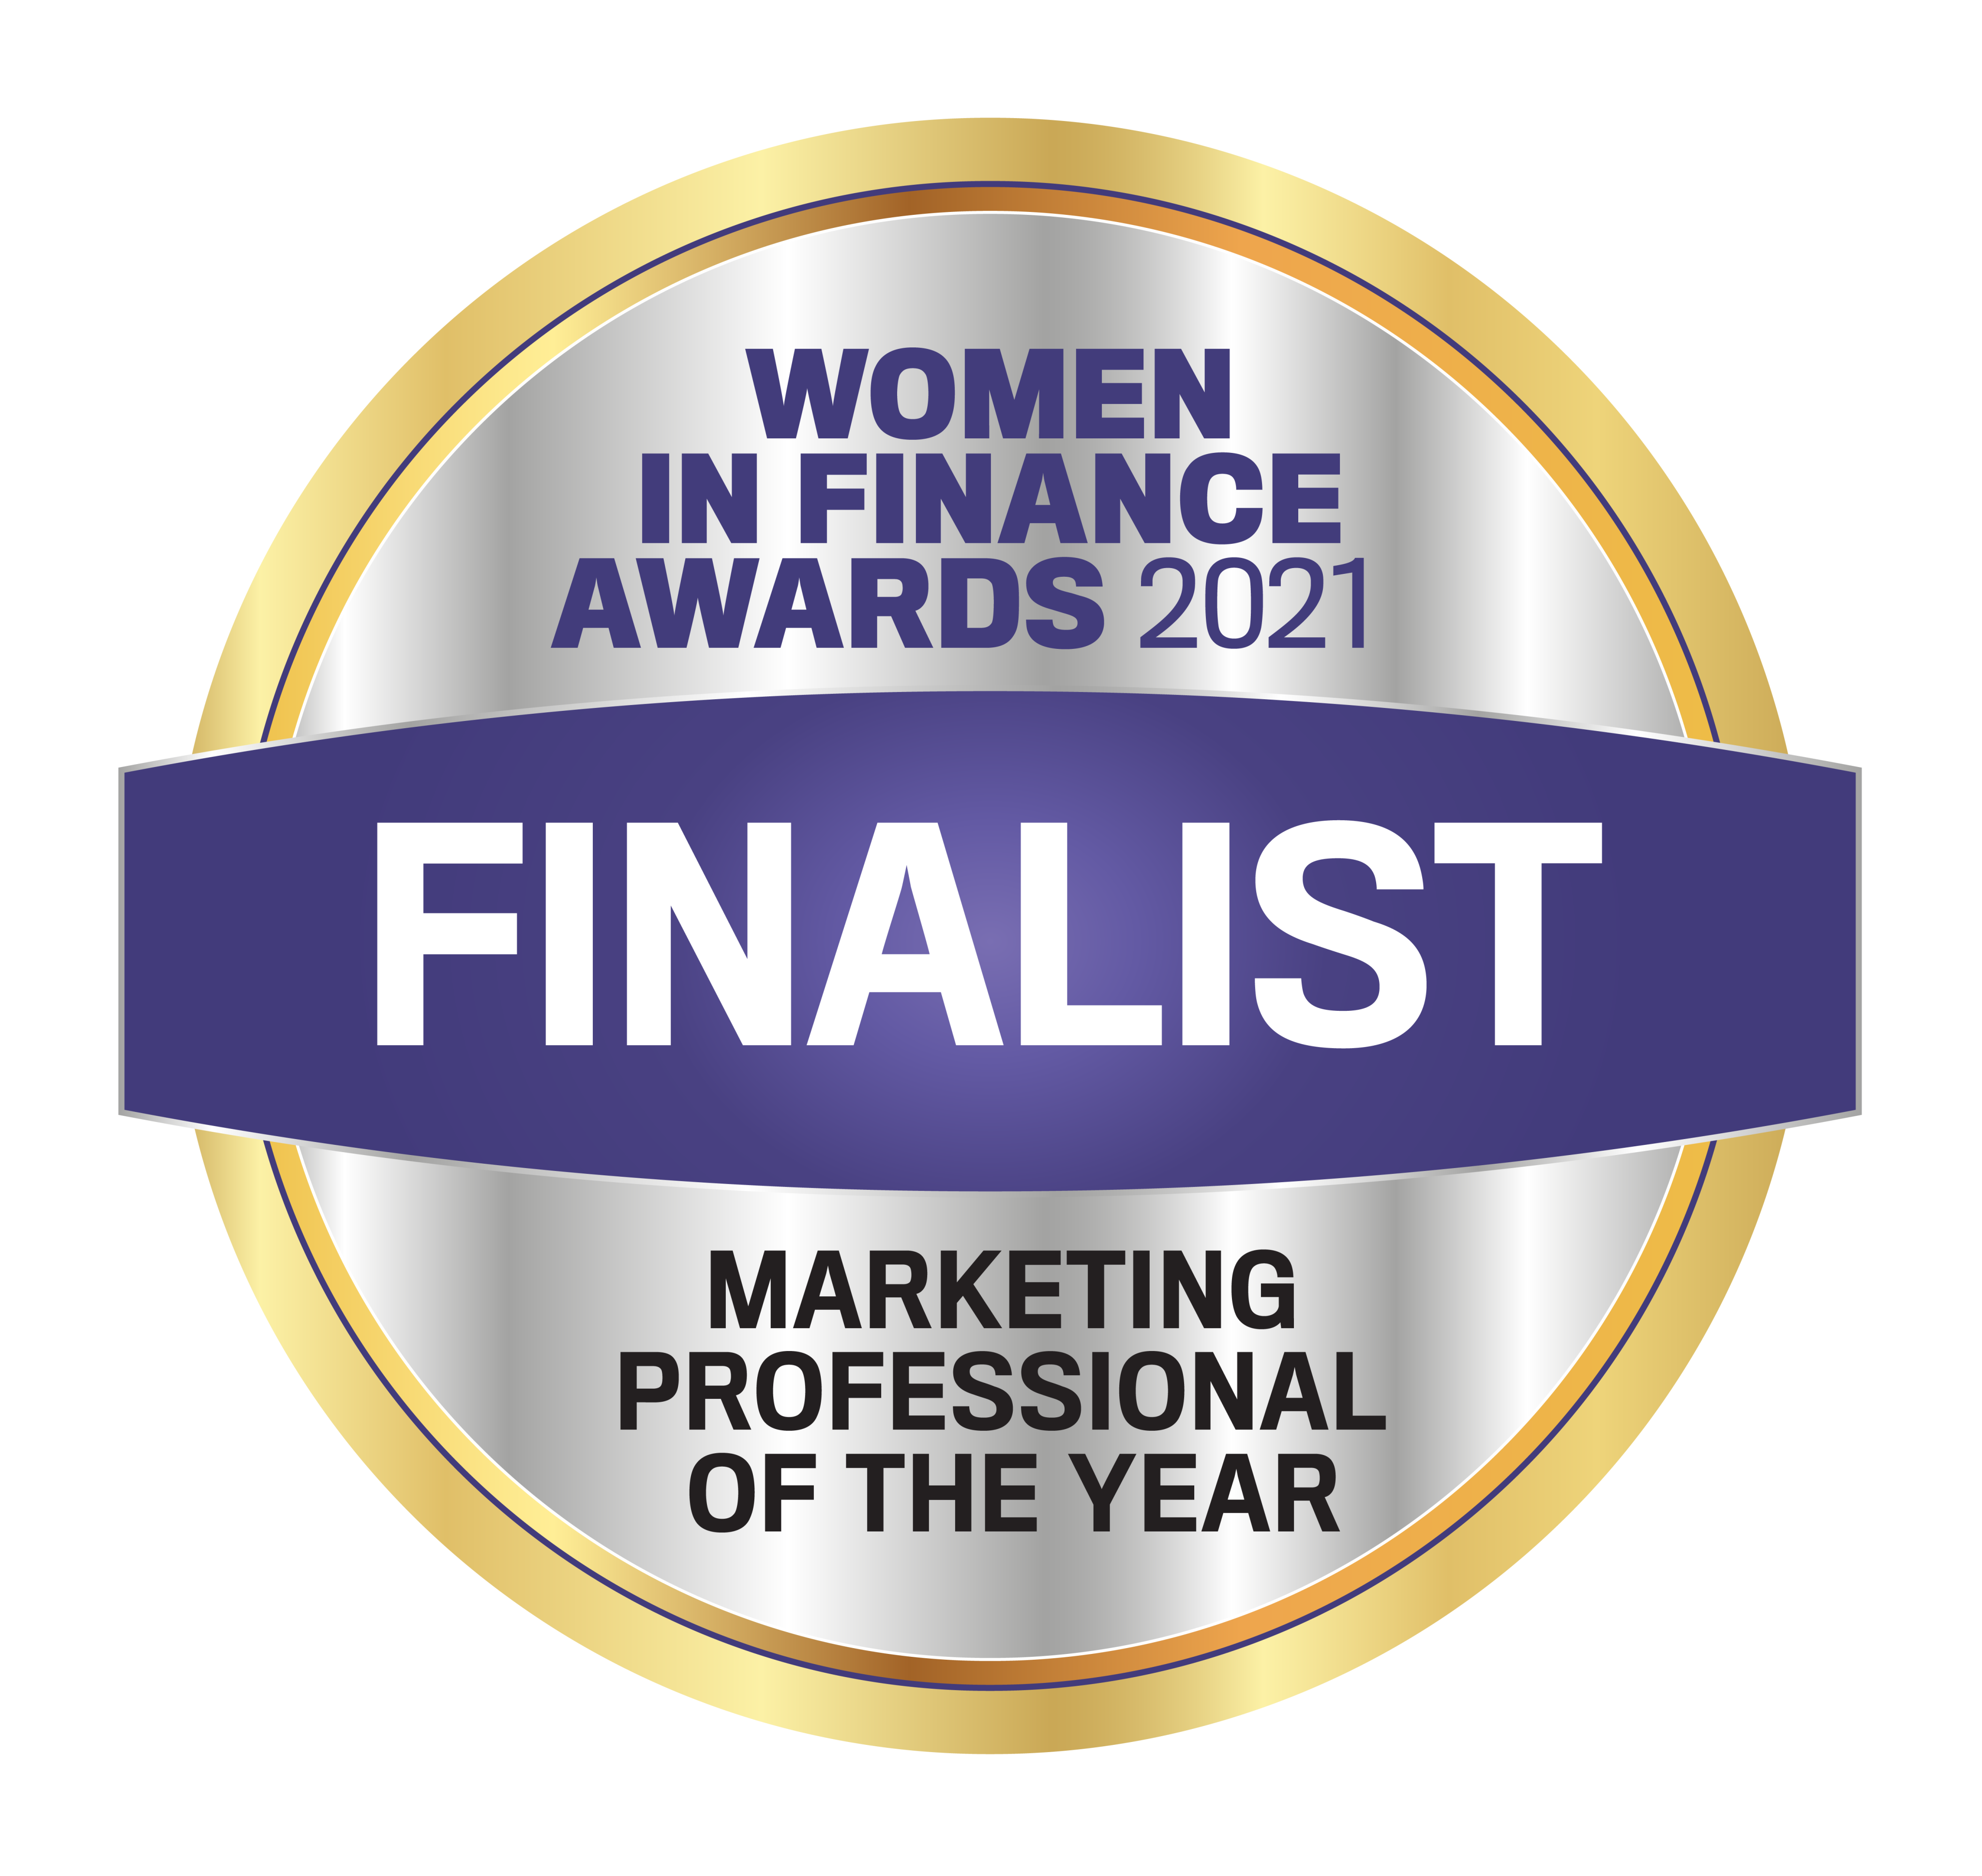 Women In Finance Marketing Professional of the Year